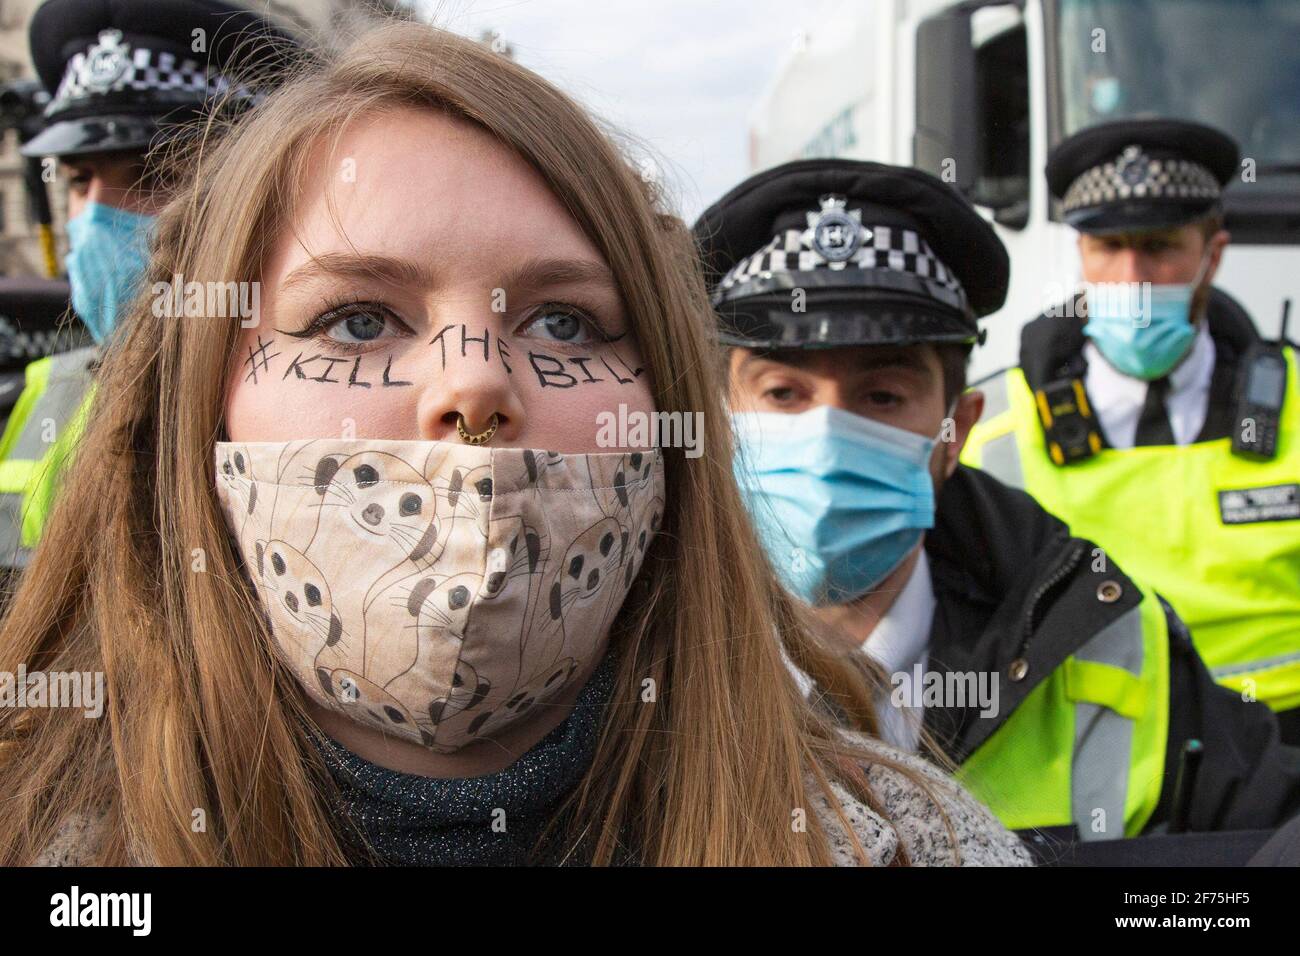 Police and Crime Bill Protest in Central London, turns to violence between protestors and Police on April 3rd 2021 Stock Photo